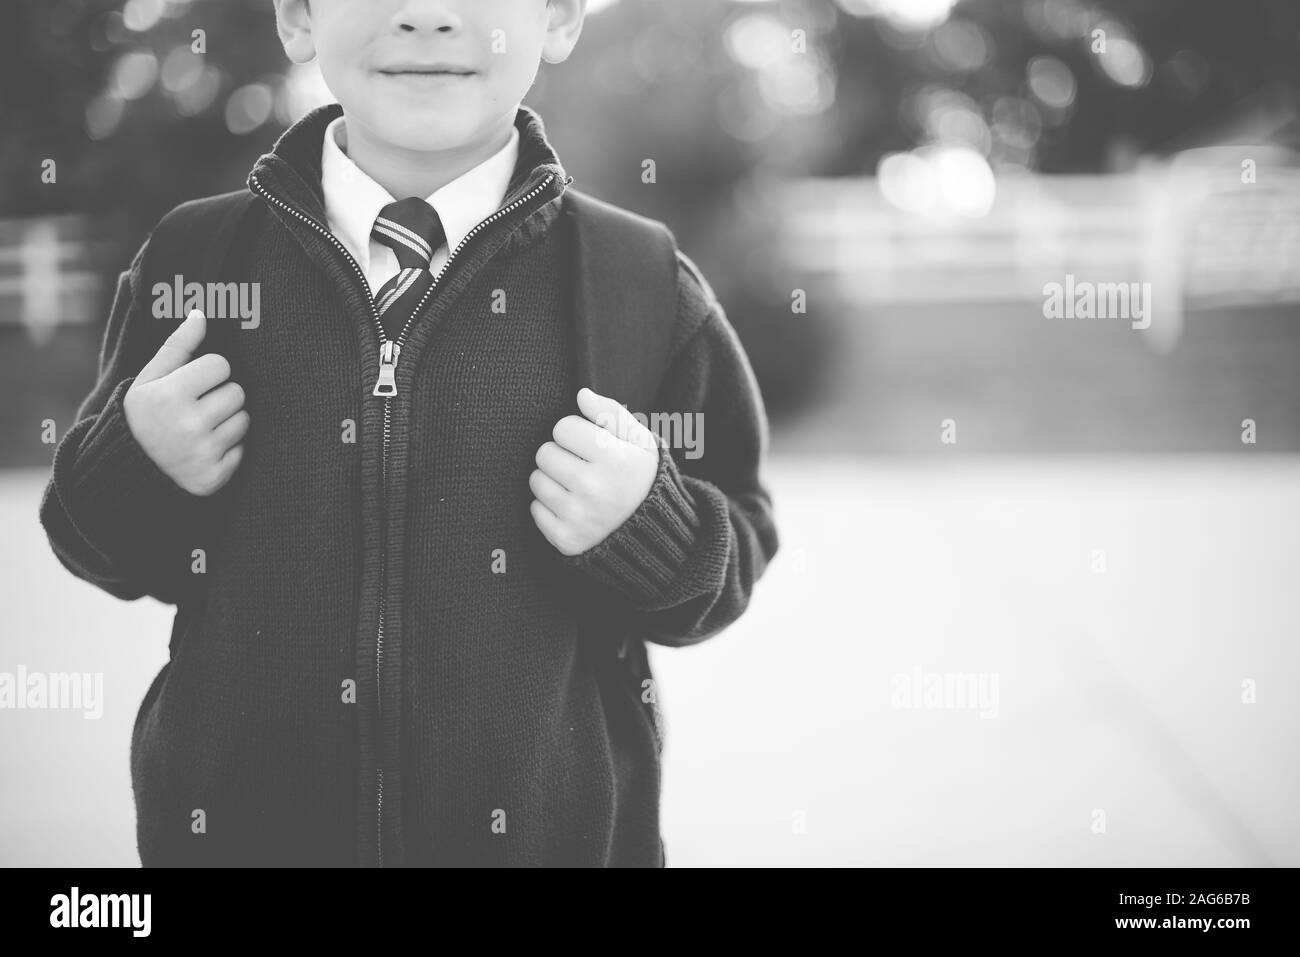 Grayscale shot of a child wearing a school uniform and a backpack with a blurred background Stock Photo